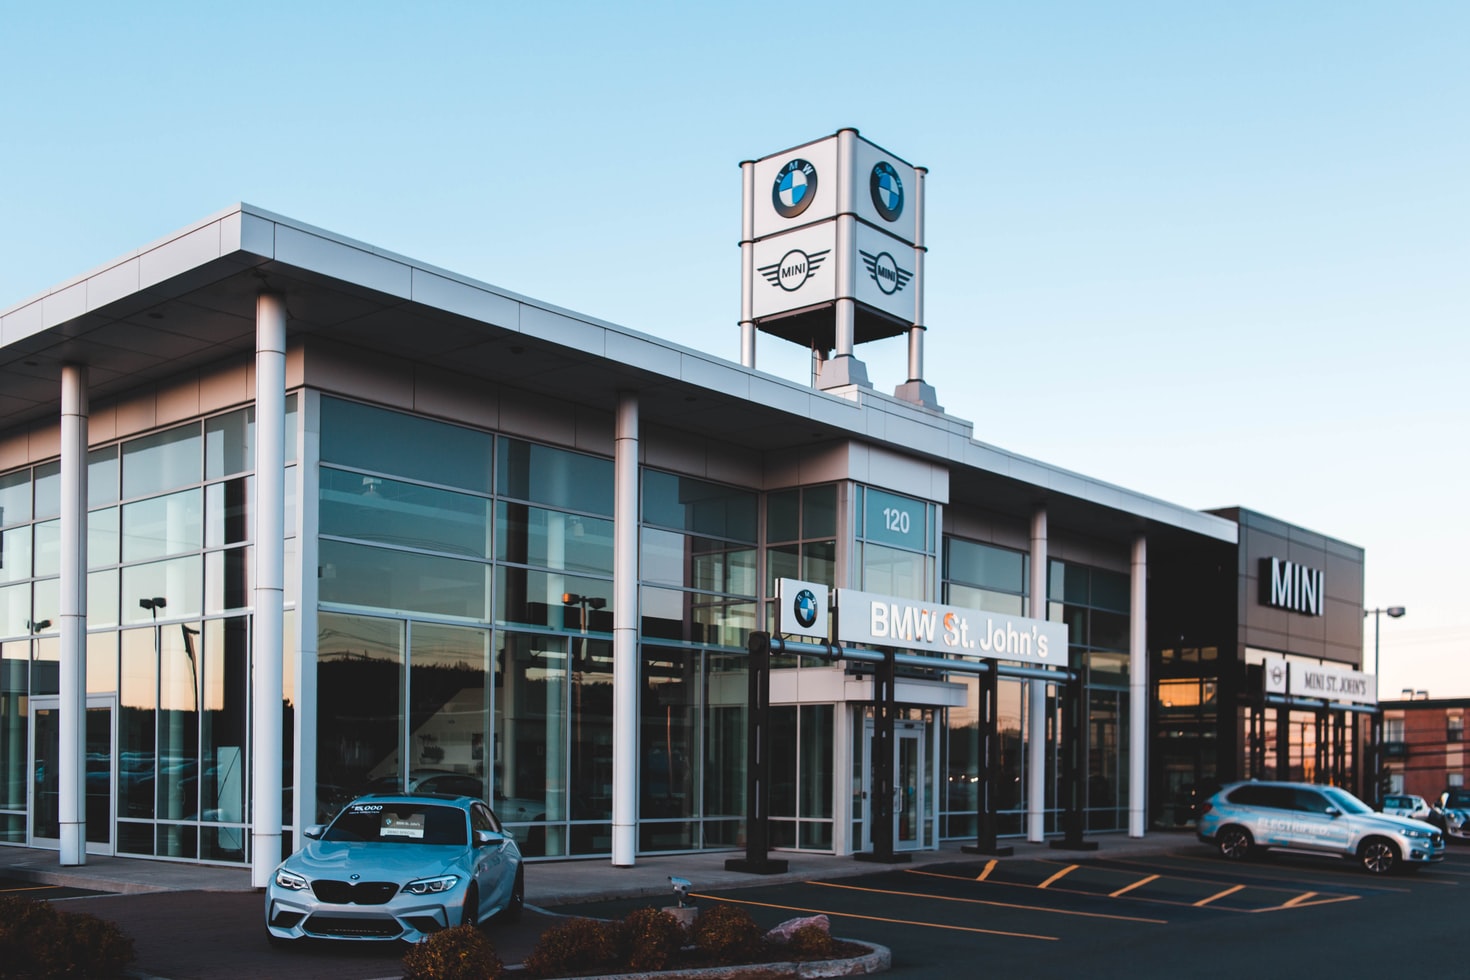 A BMW and Mini dealership showroom as seen from the parking lot.